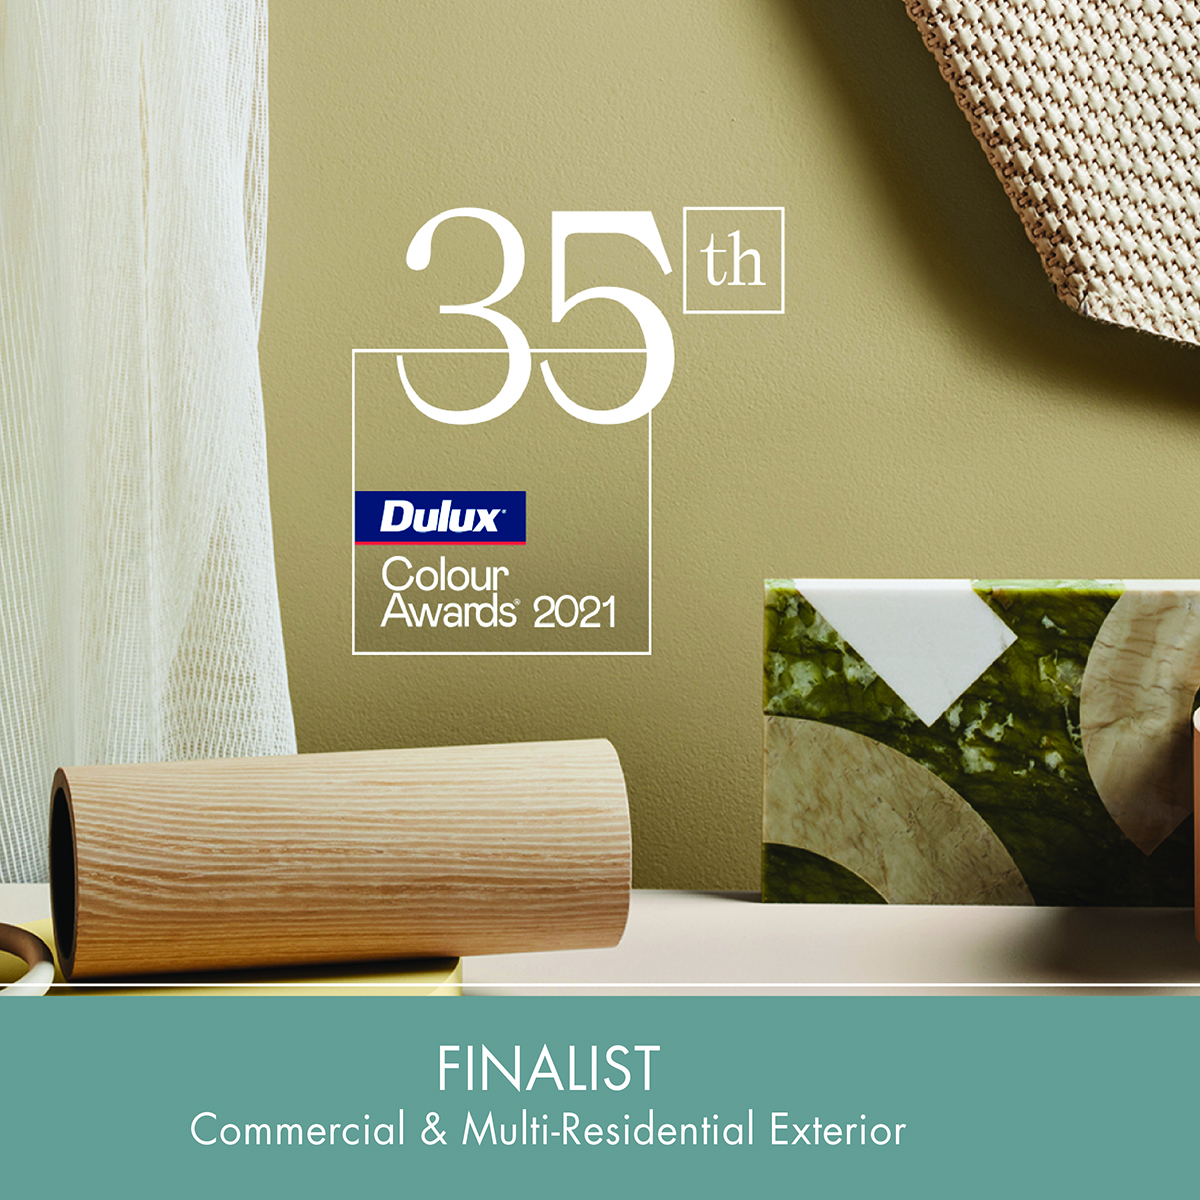 Dulux Finalist Commercial & Multi Residential Exterior